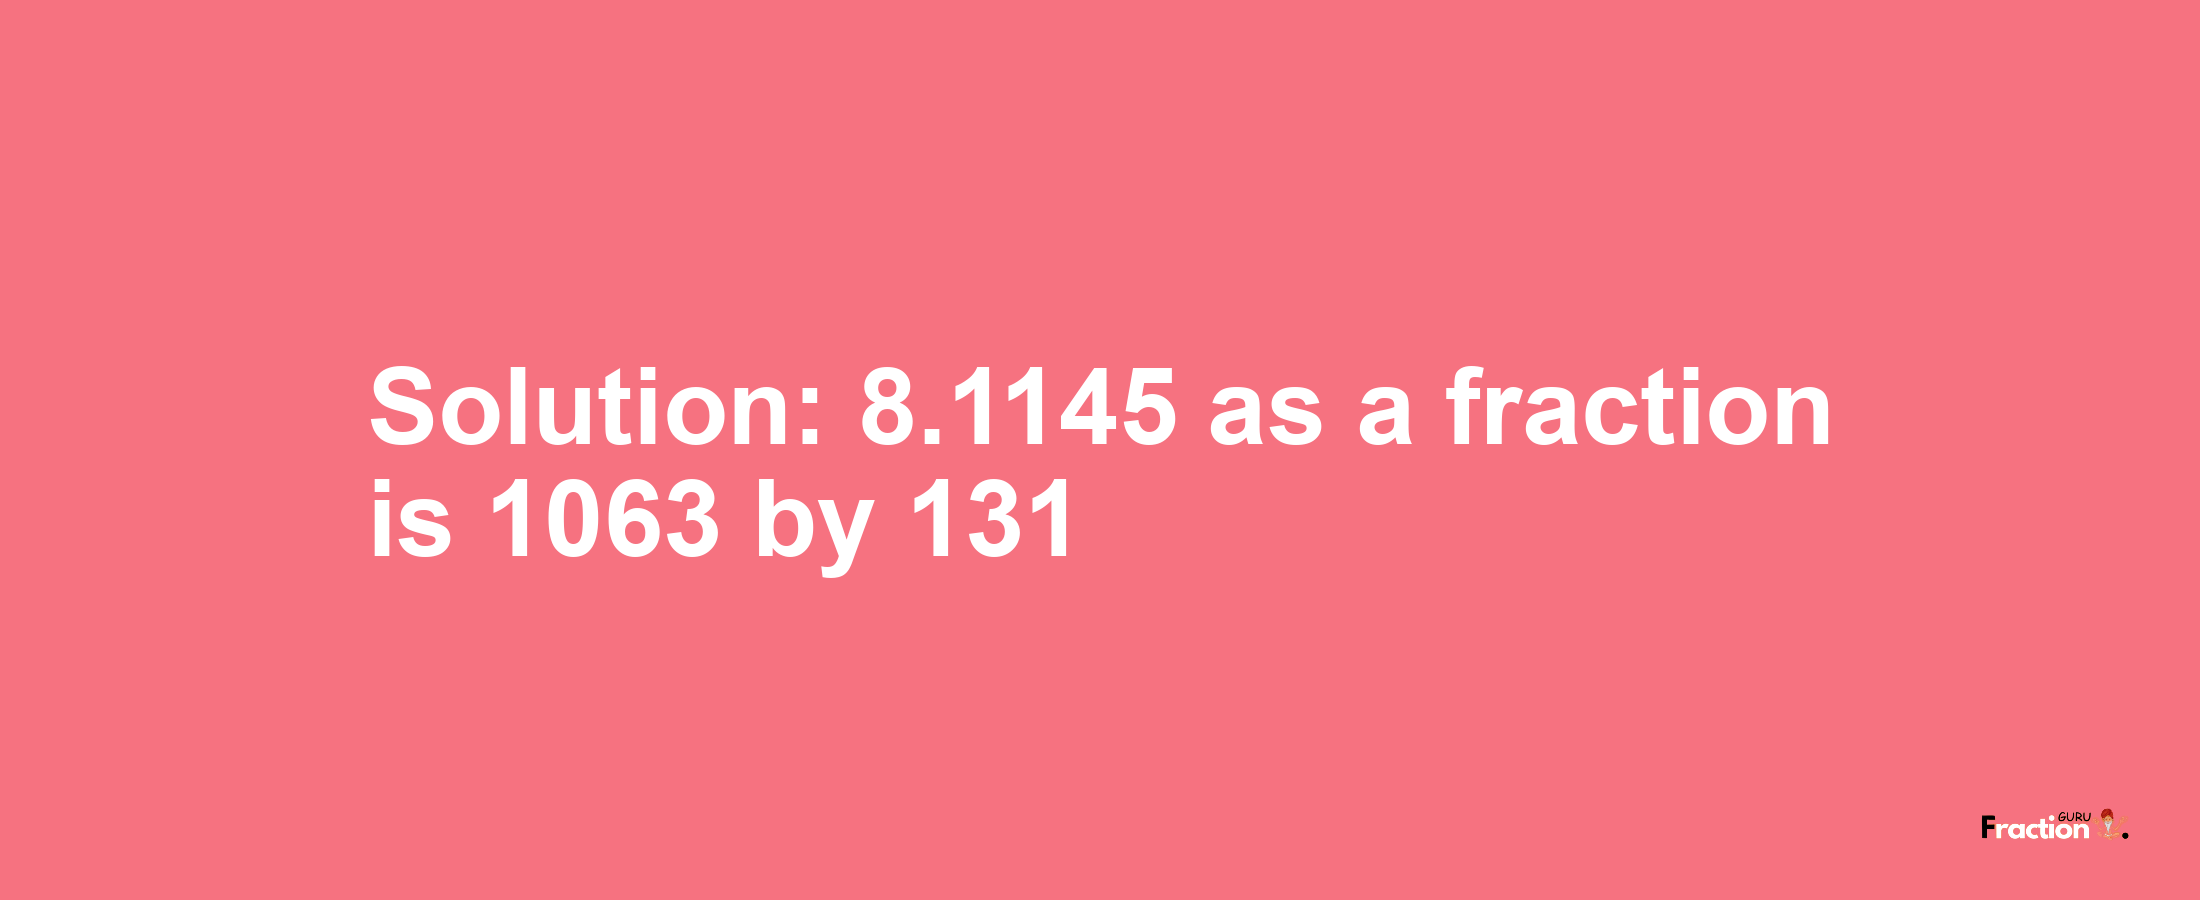 Solution:8.1145 as a fraction is 1063/131